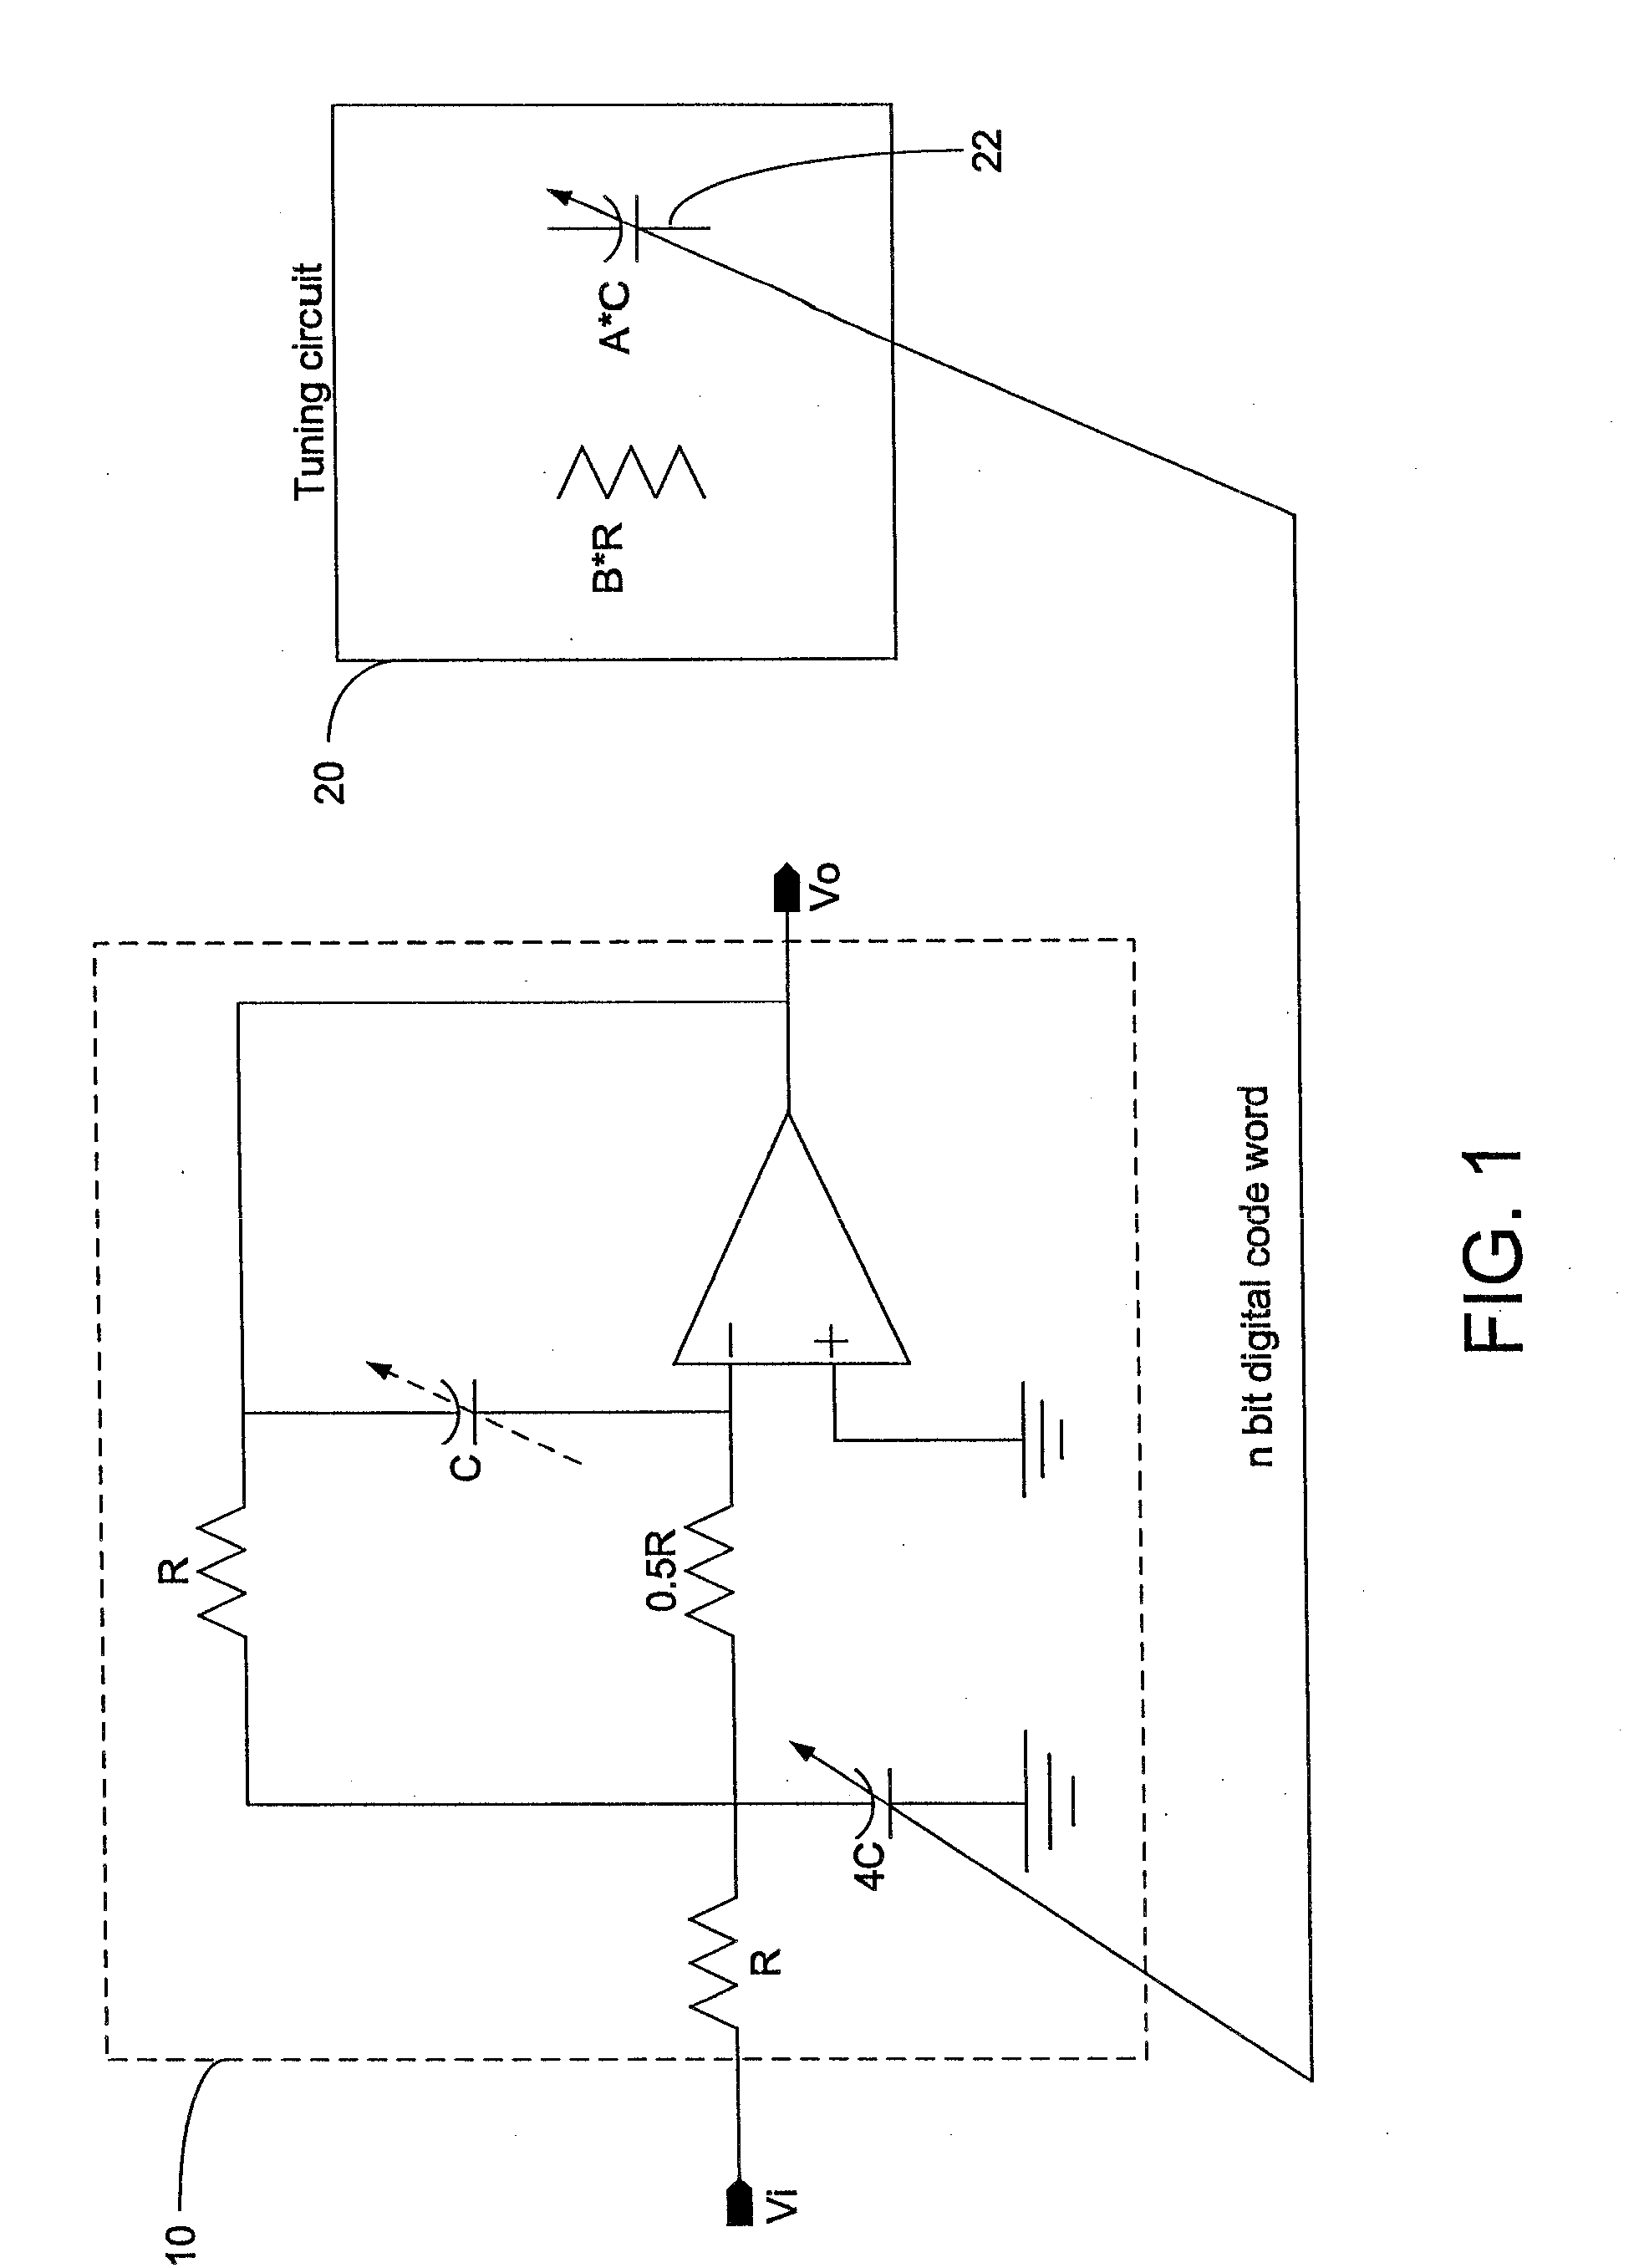 Method and apparatus for tuning an active filter